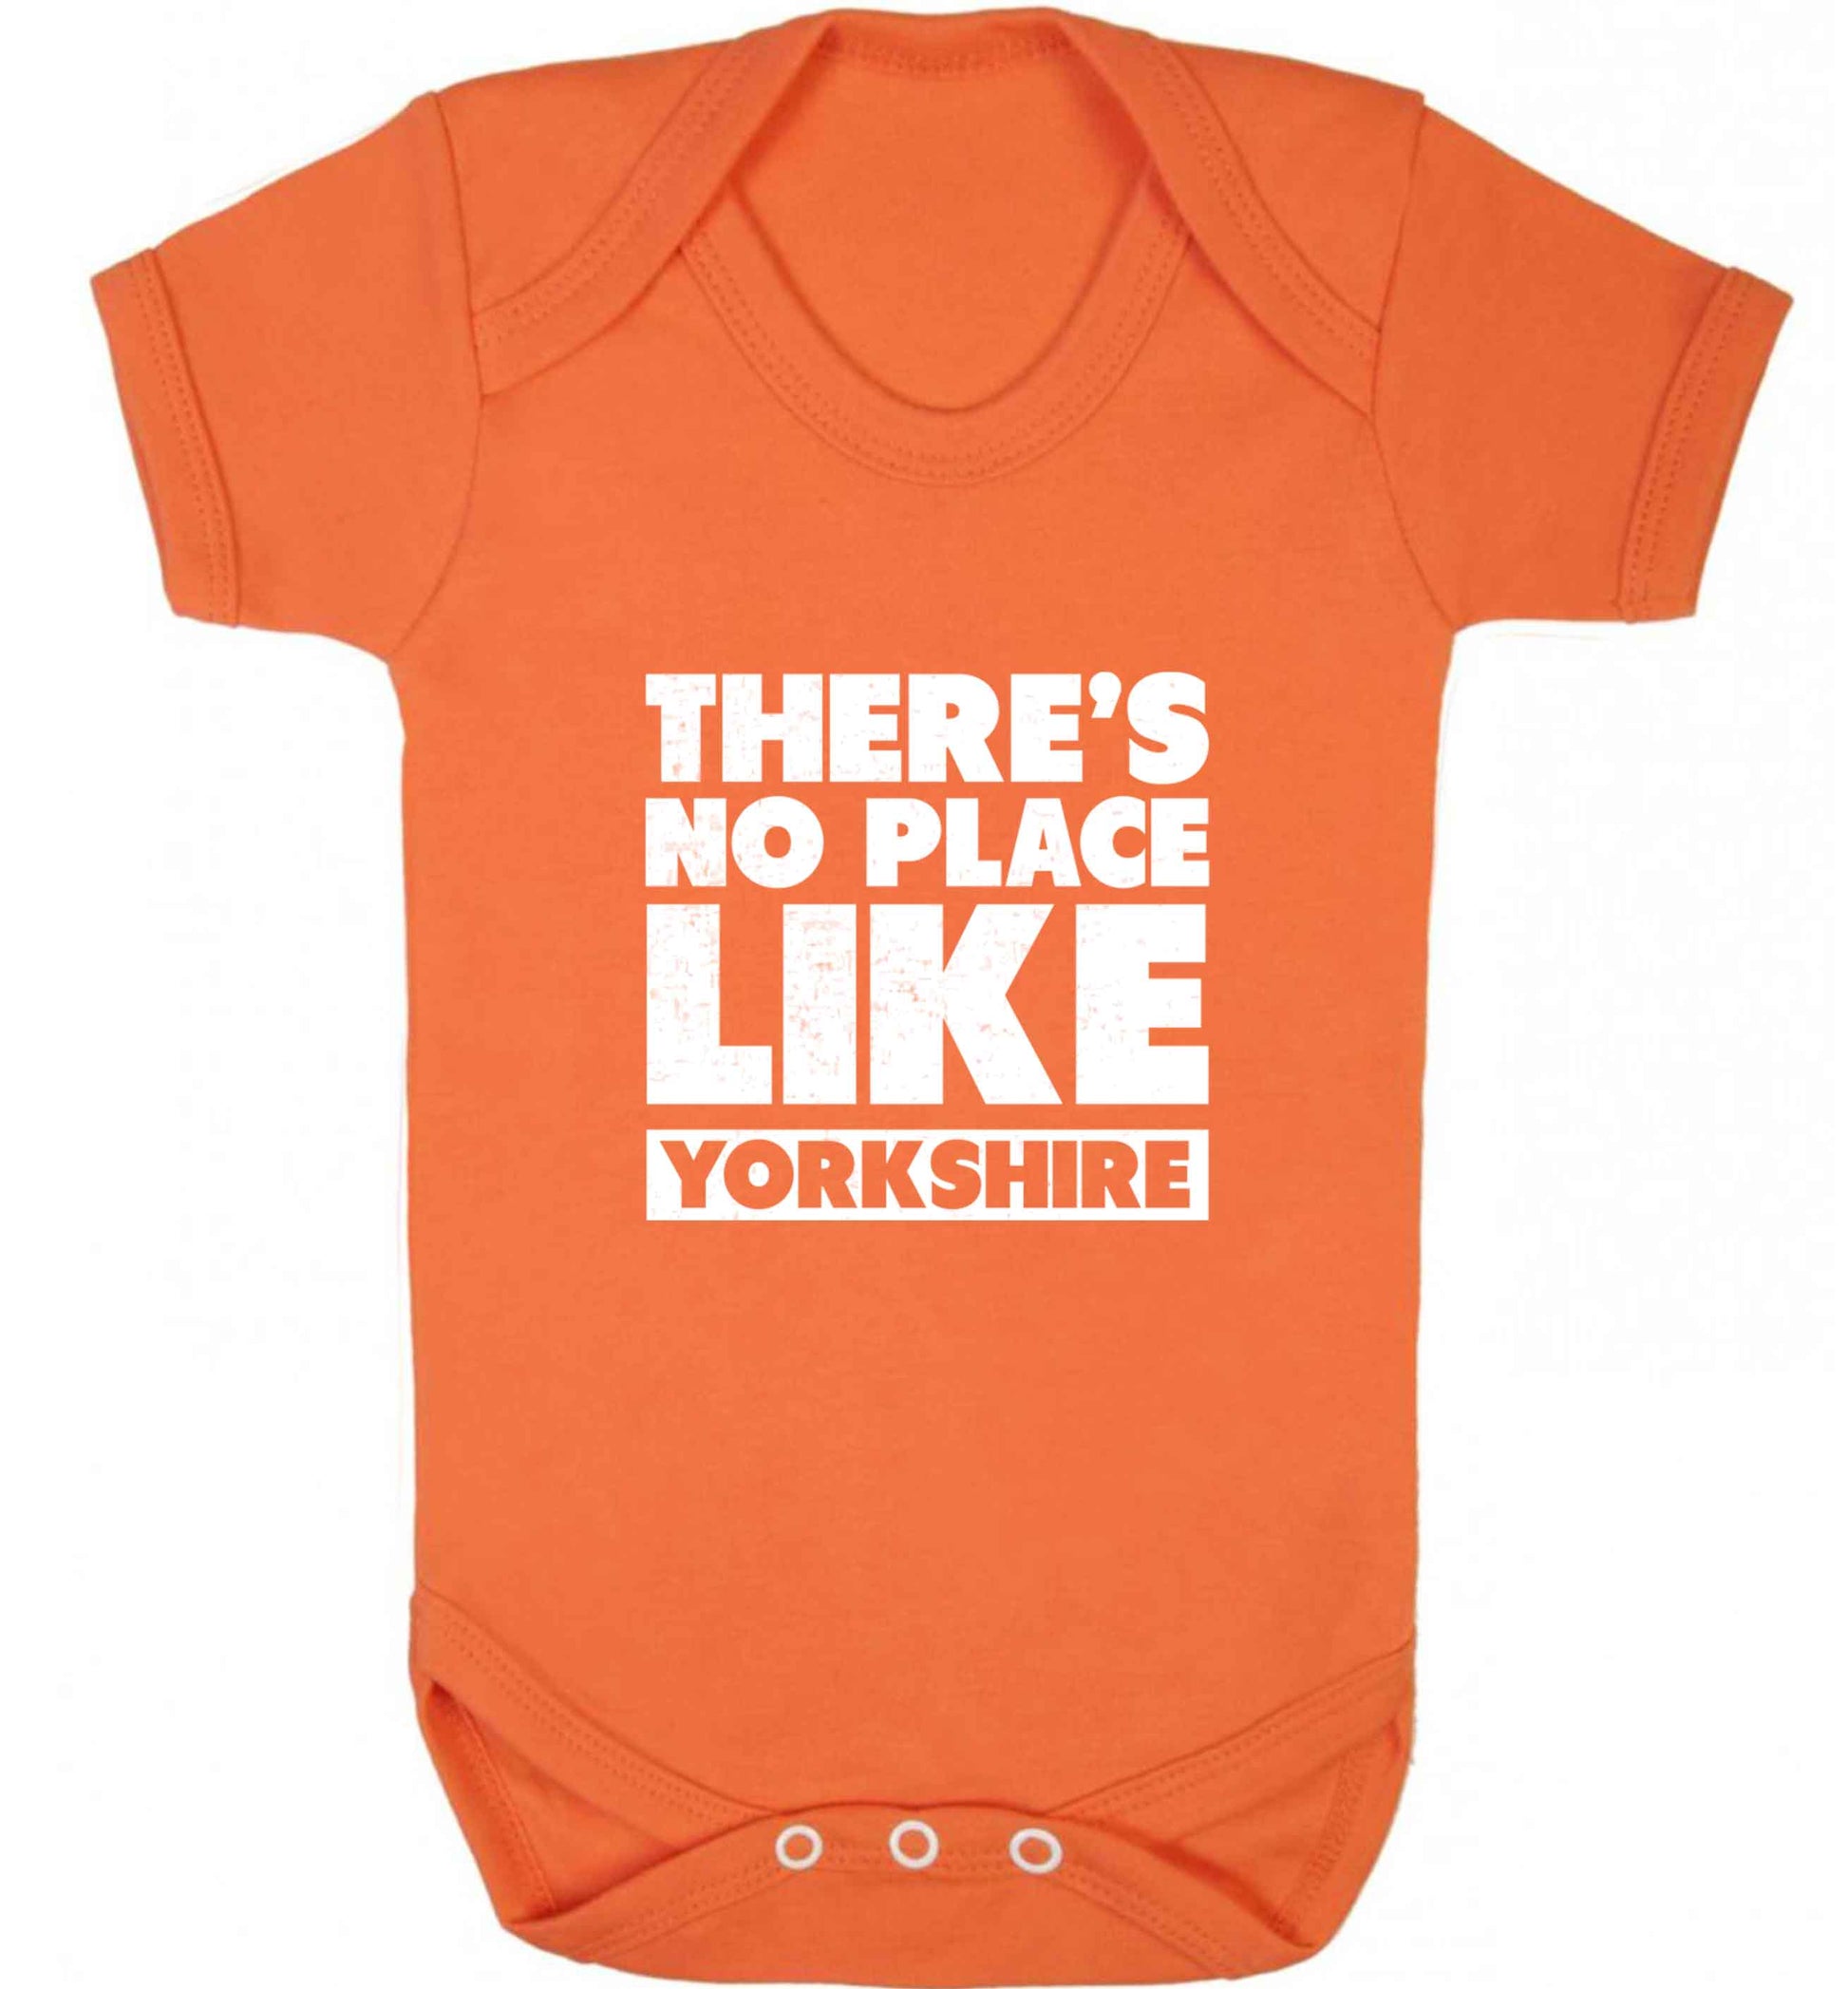 There's no place like Yorkshire baby vest orange 18-24 months